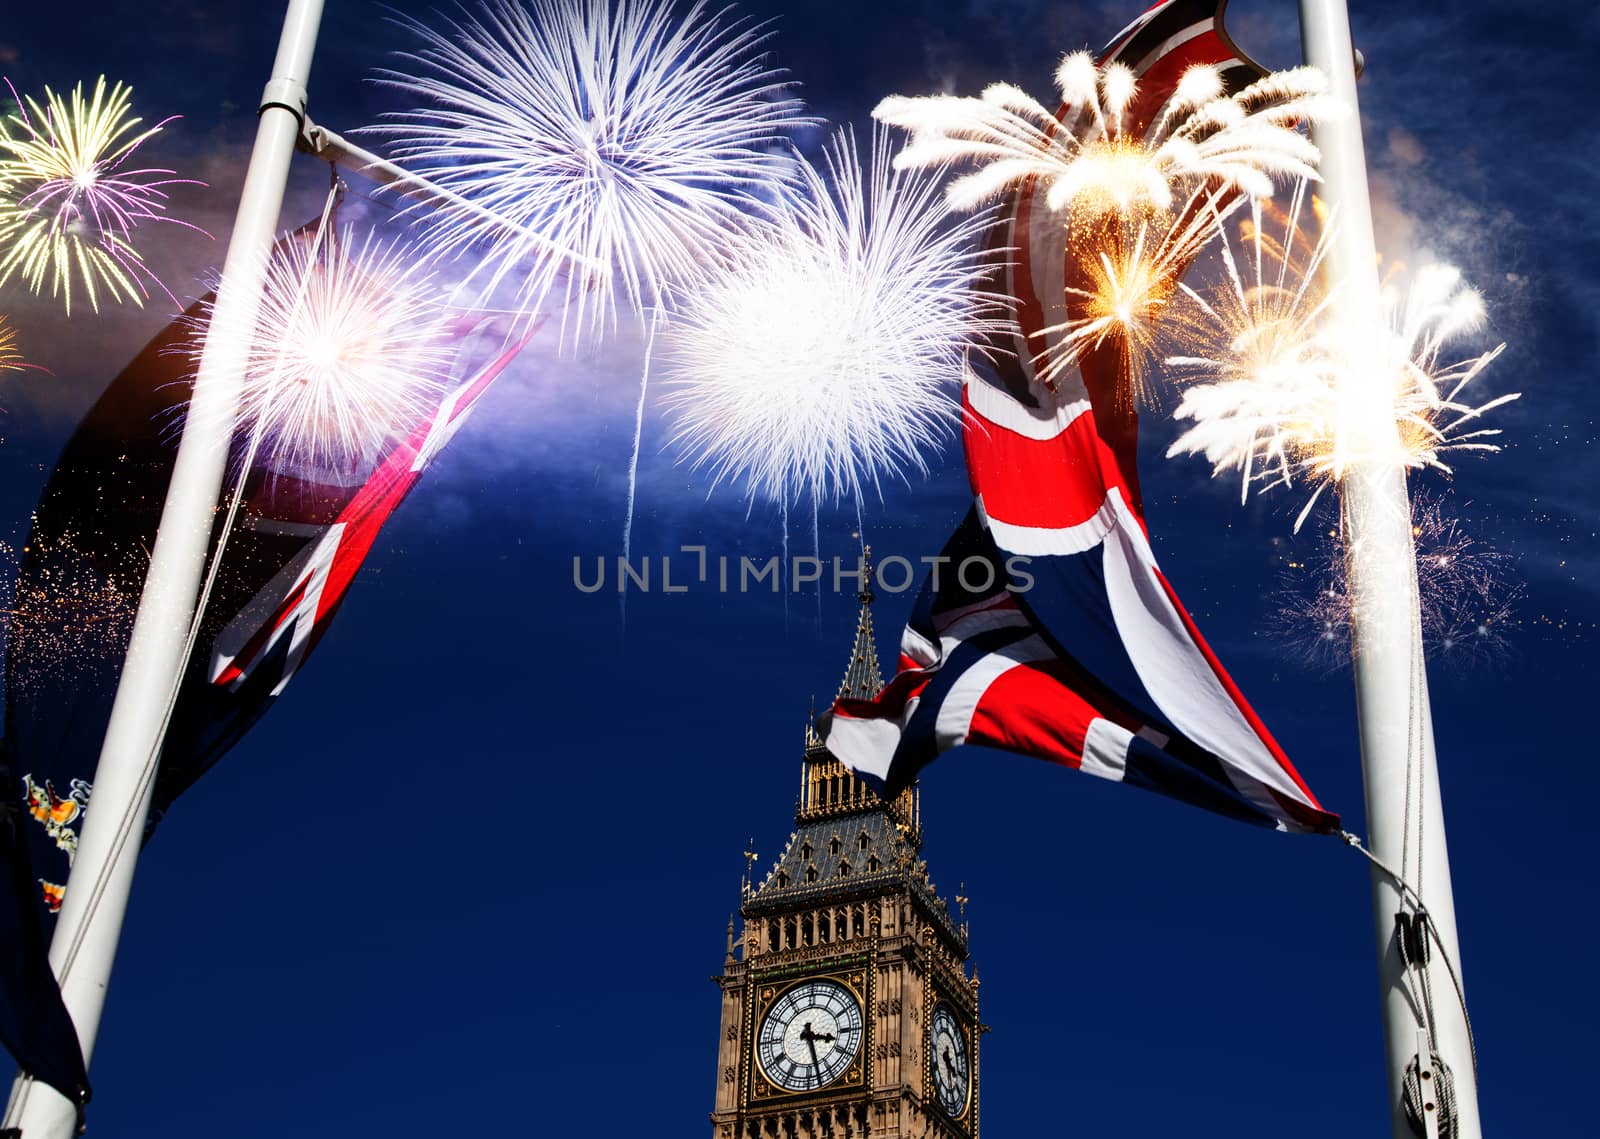  fireworks over Big Ben - new year celebrations in London, UK